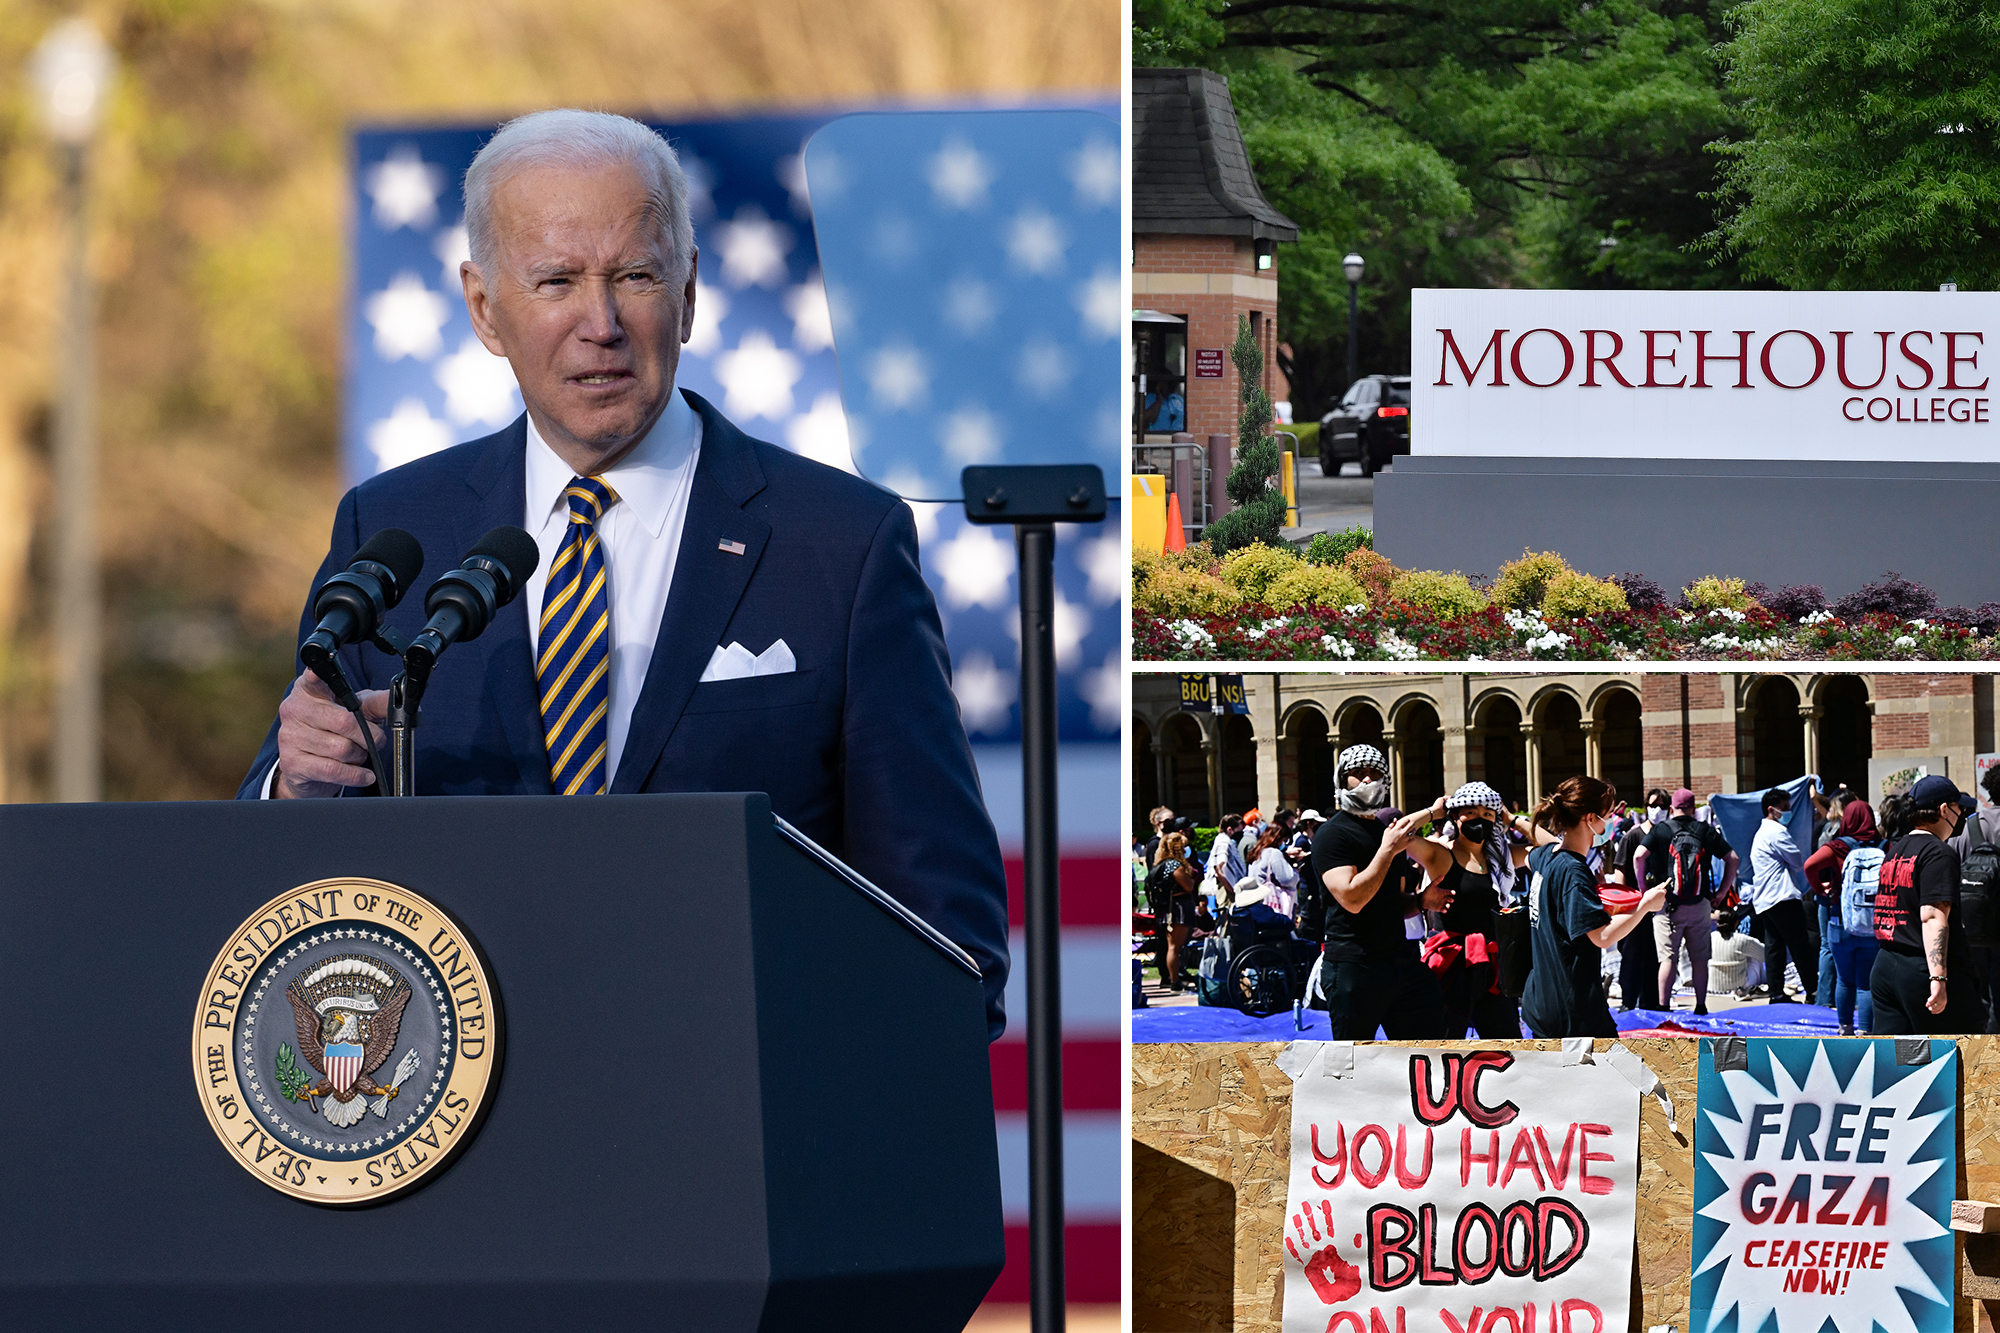 Joe Biden standing at a podium with microphones and a sign